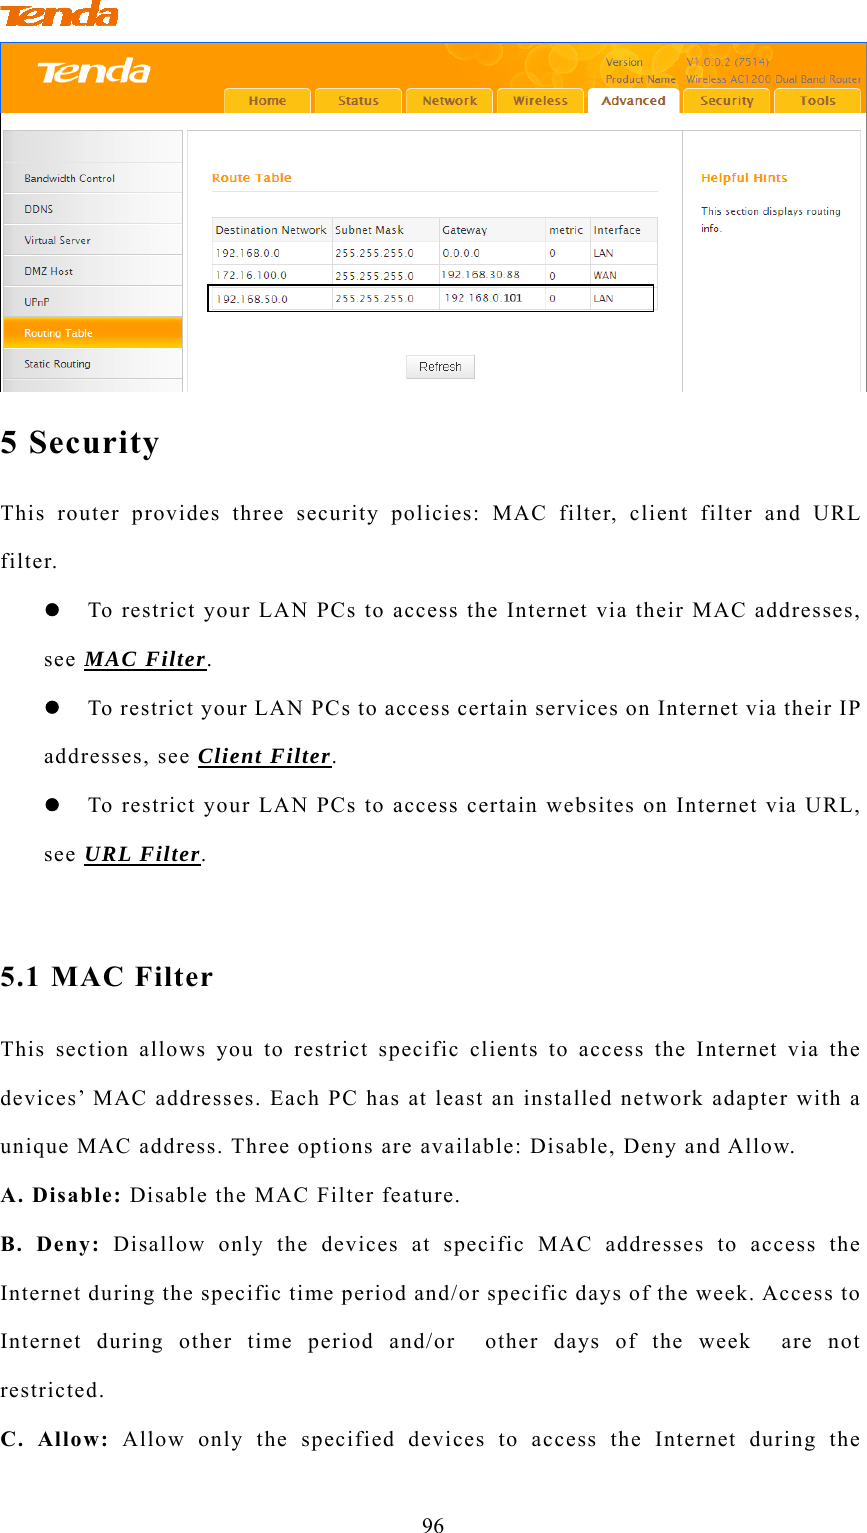                                         96  5 Security This router provides three security policies: MAC filter, client filter and URL filter.  To restrict your LAN PCs to access the Internet via their MAC addresses, see MAC Filter.  To restrict your LAN PCs to access certain services on Internet via their IP addresses, see Client Filter.  To restrict your LAN PCs to access certain websites on Internet via URL, see URL Filter.  5.1 MAC Filter This section allows you to restrict specific clients to access the Internet via the devices’ MAC addresses. Each PC has at least an installed network adapter with a unique MAC address. Three options are available: Disable, Deny and Allow. A. Disable: Disable the MAC Filter feature. B. Deny: Disallow only the devices at specific MAC addresses to access the Internet during the specific time period and/or specific days of the week. Access to Internet during other time period and/or  other days of the week  are not restricted. C. Allow: Allow only the specified devices to access the Internet during the 